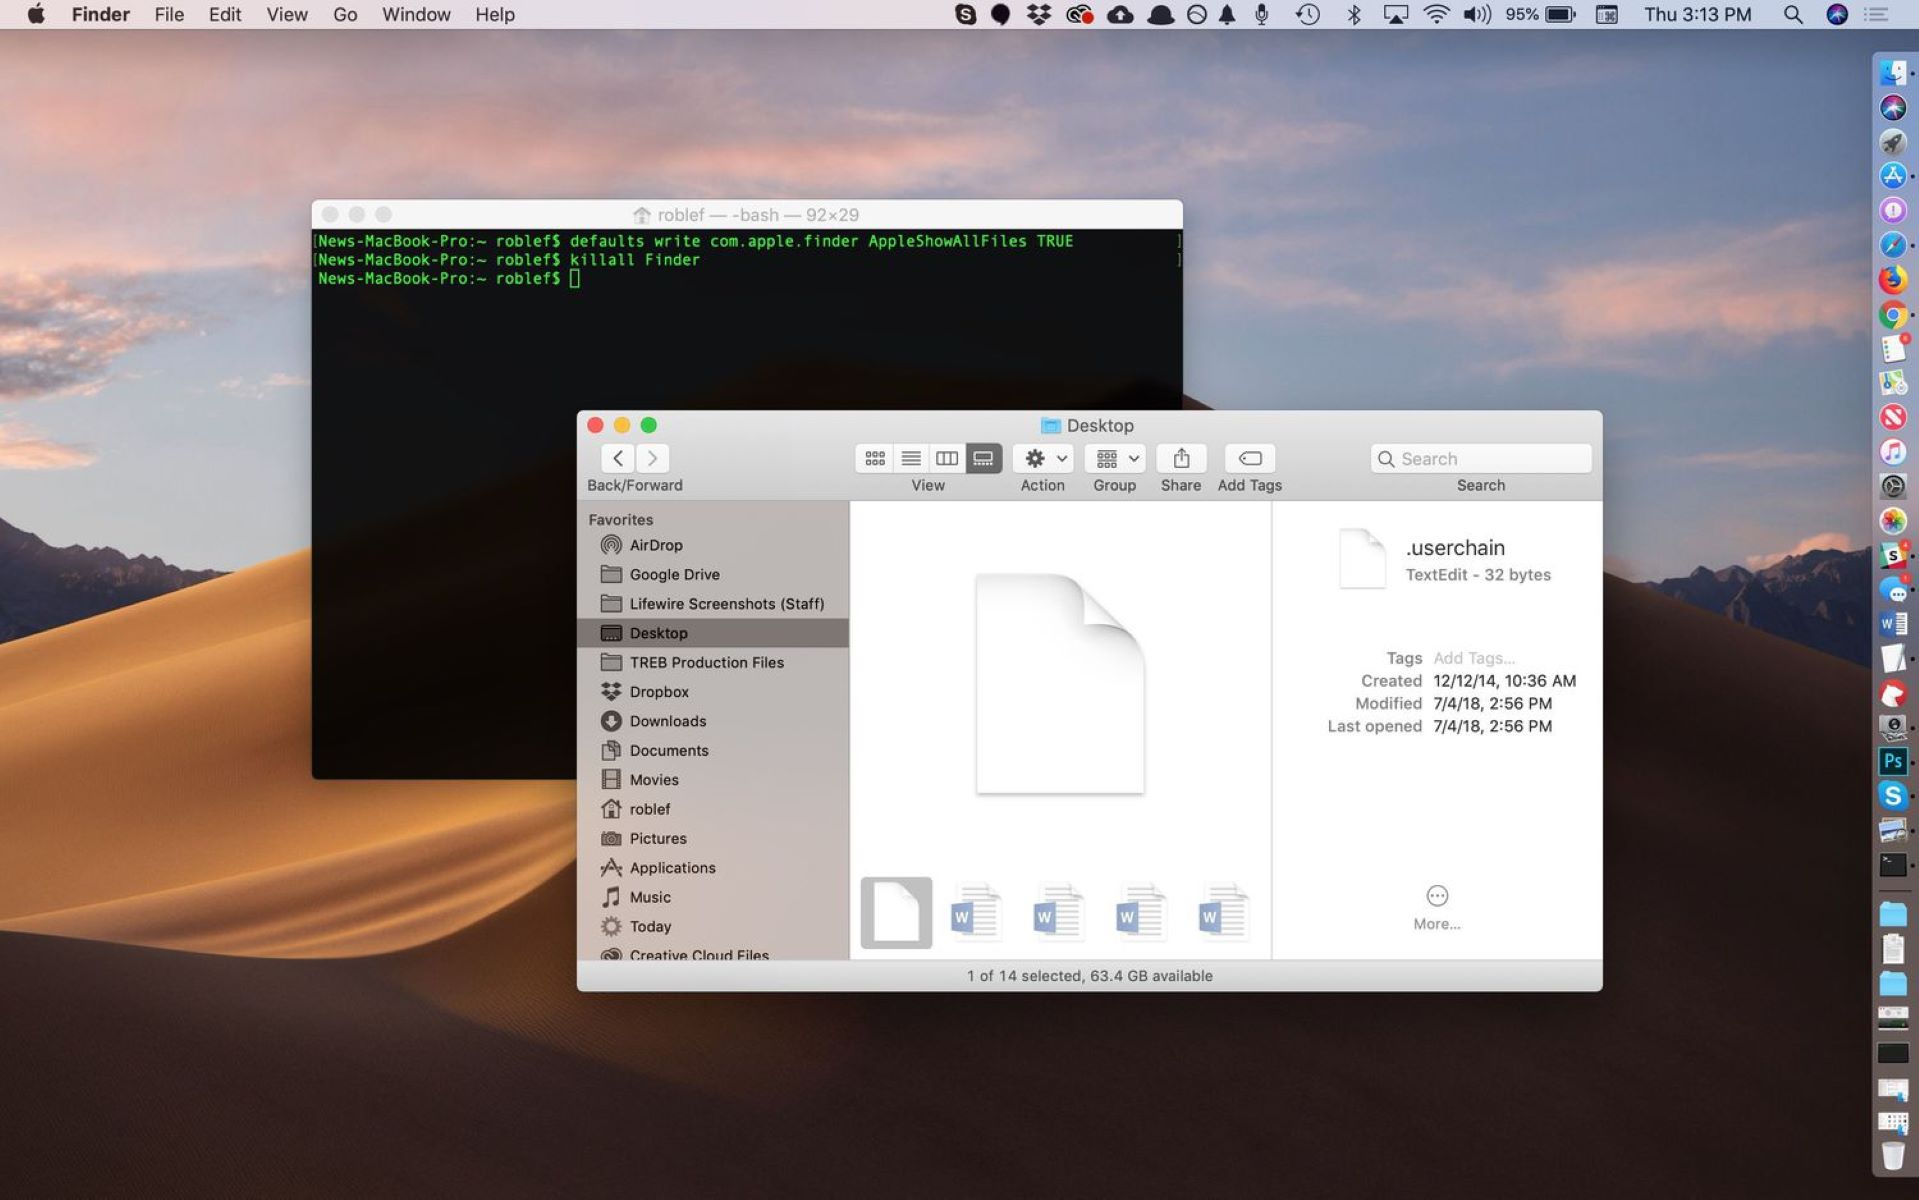 View Hidden Files And Folders On Your Mac With Terminal